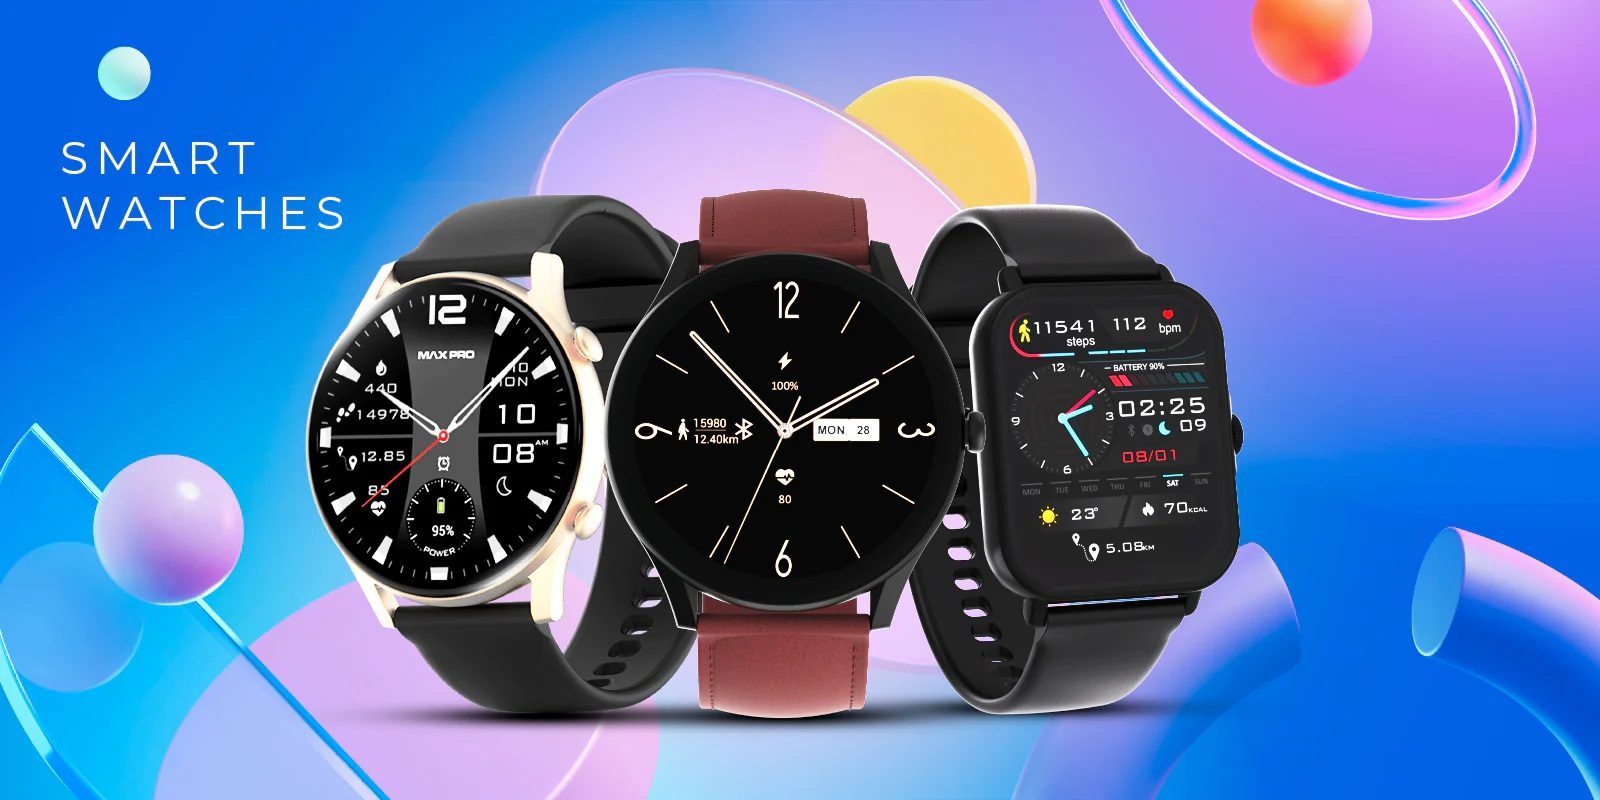 Buying Quality Premium Smartwatches Under 1500 - 100% Free Guest Posting Website